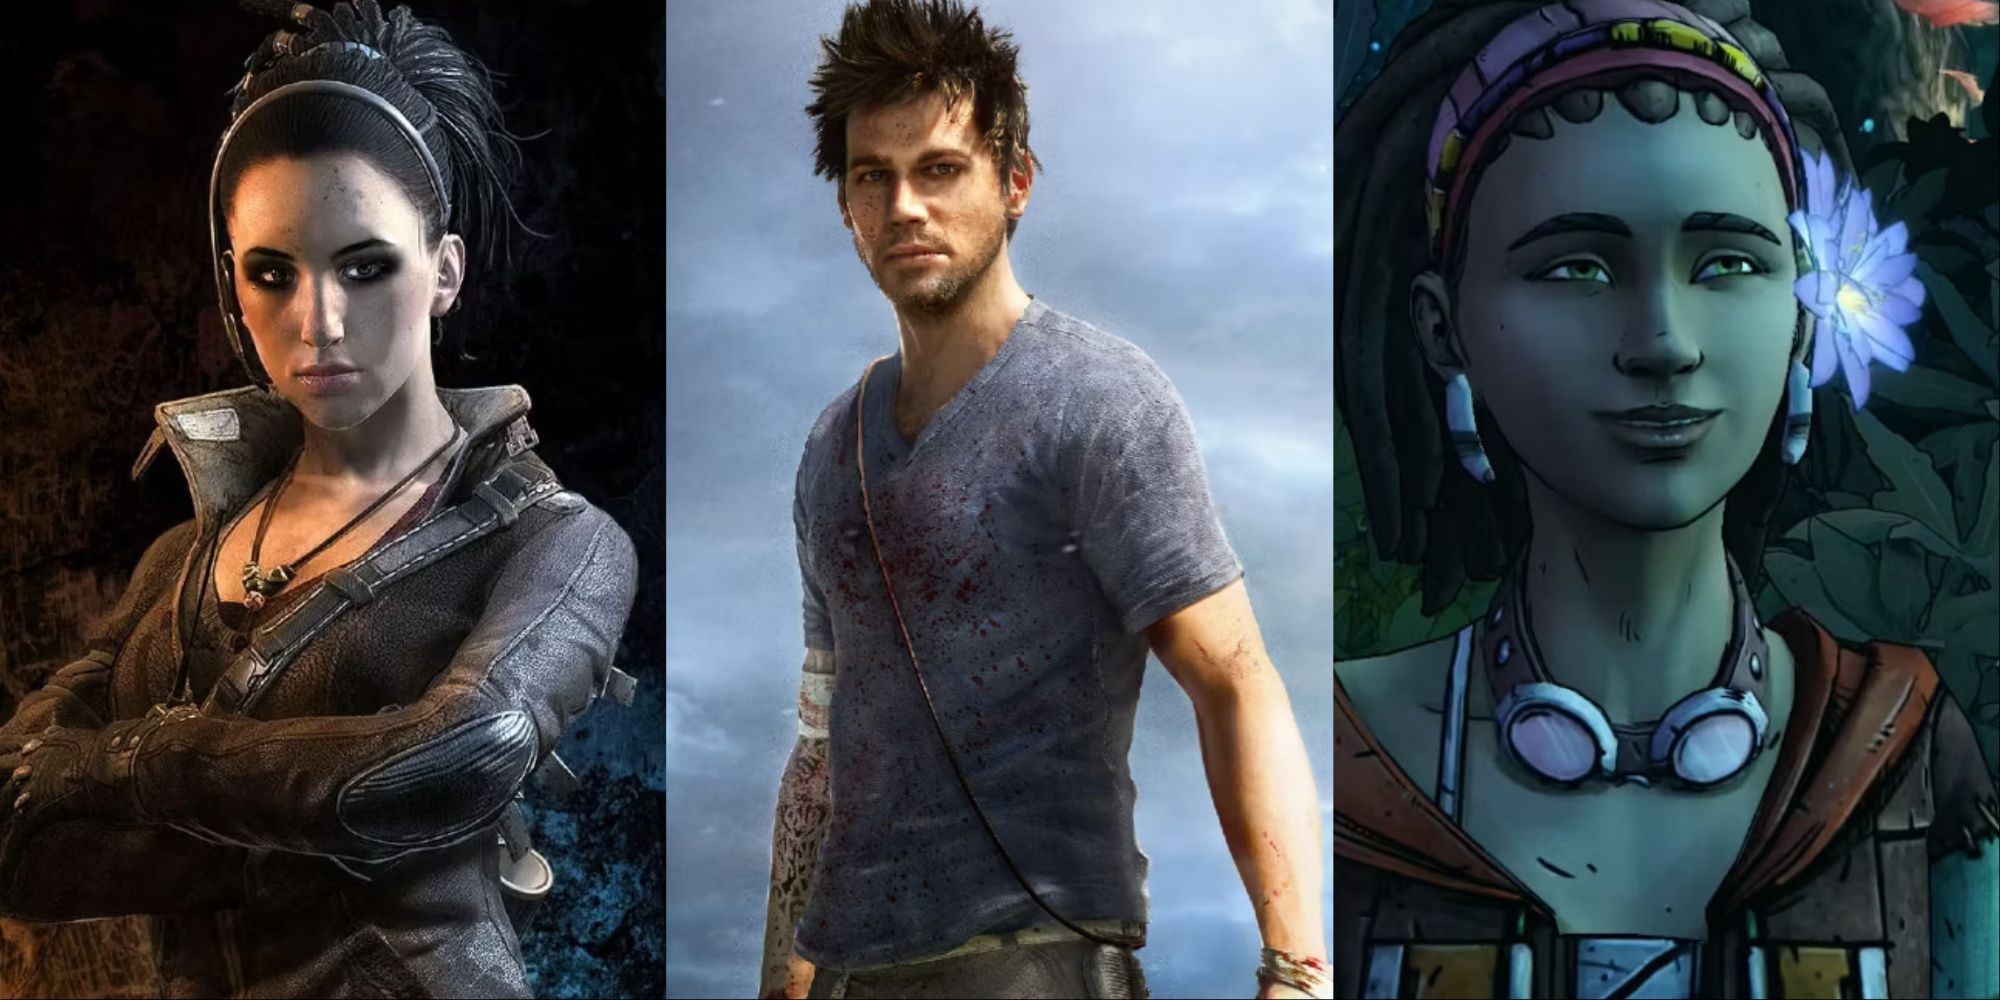 A collage showing Jade from Dying Light, Jason Brody from Far Cry 3, and Sasha from Tales From The Borderlands.